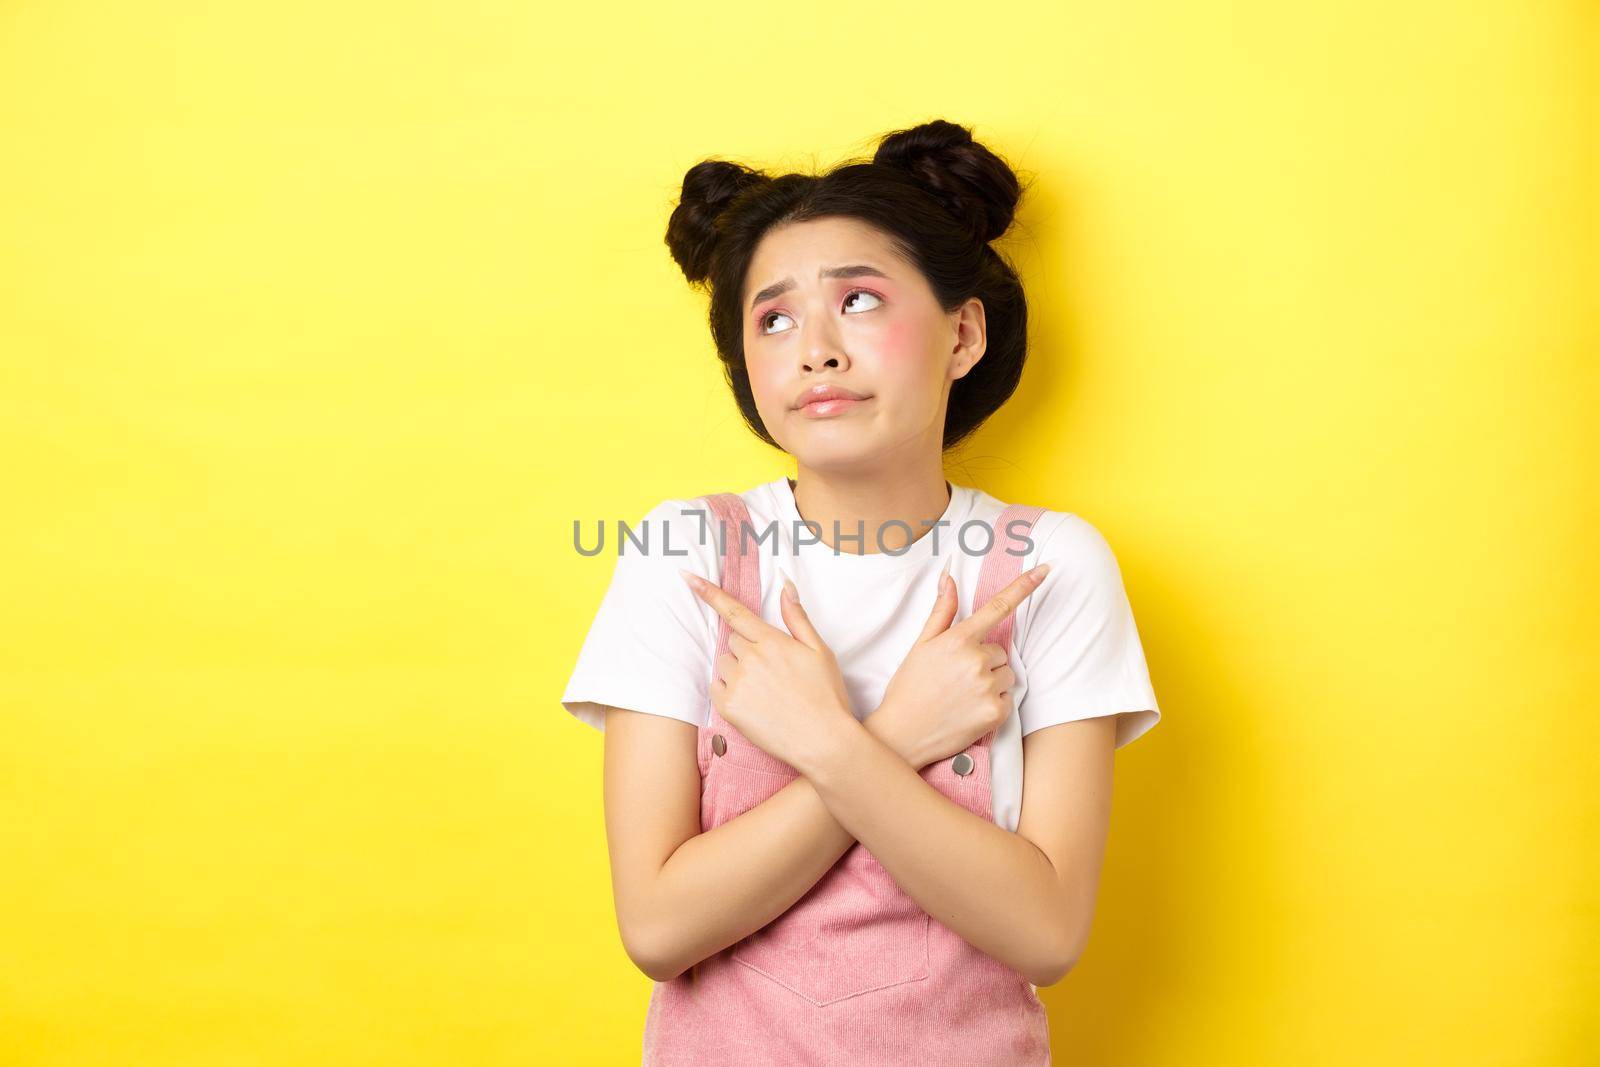 Indecisive asian teen girl troubled to make choice, pointing sideways and looking at logo confused, standing on yellow background.